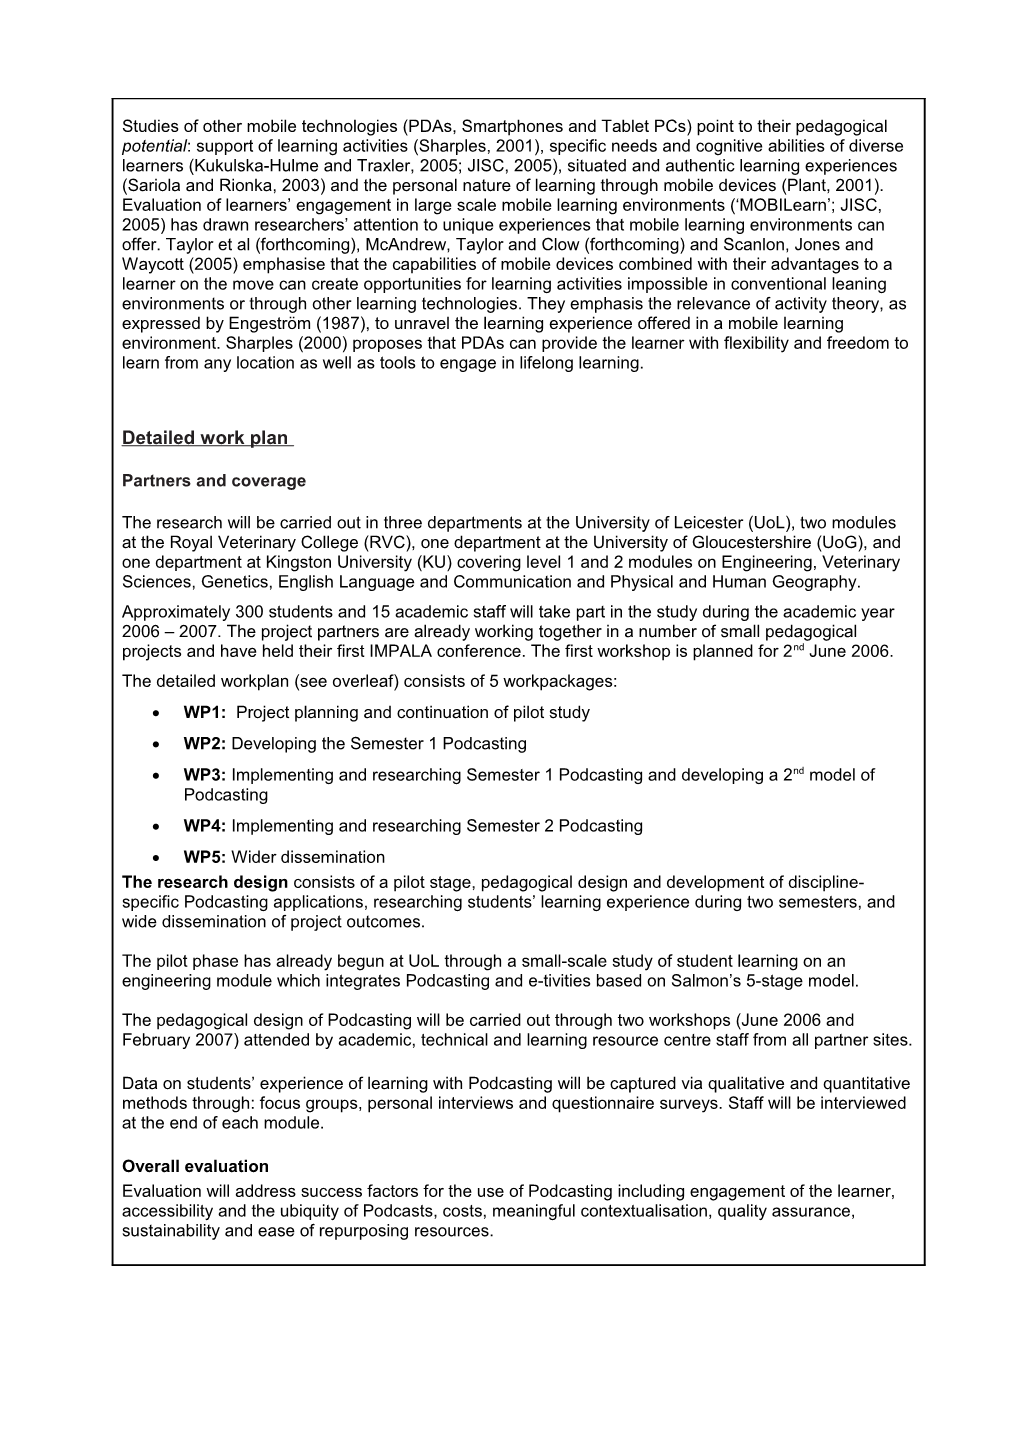 Higher Educationacademy E-Learning Research Grants 2006